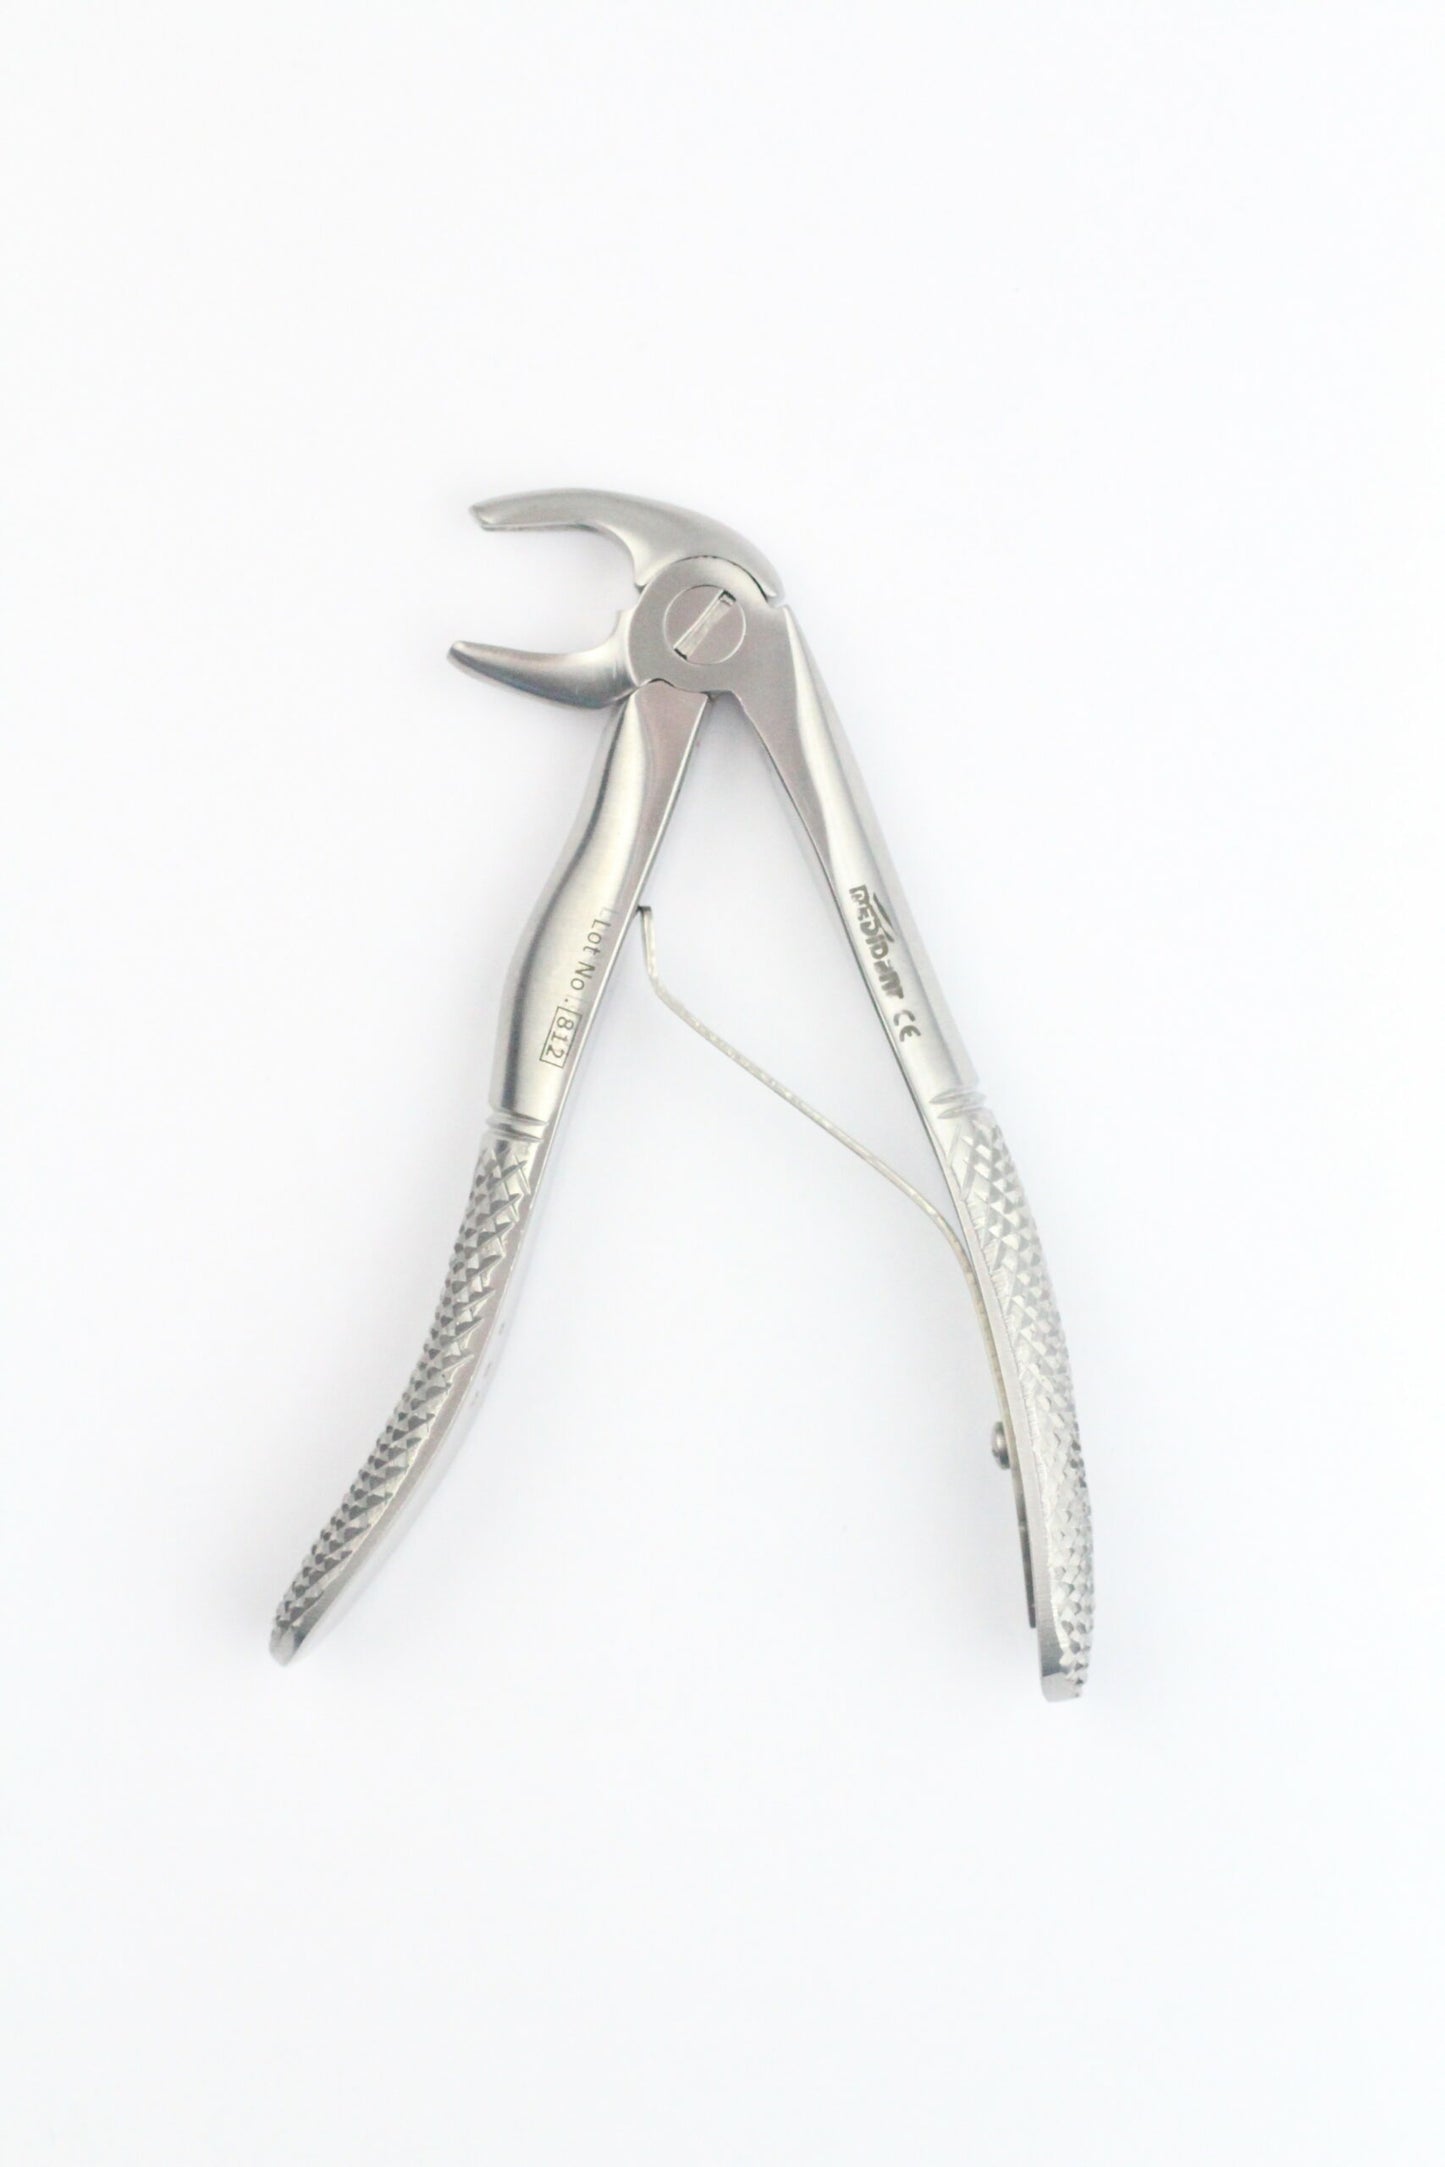 SMALL EXTRACTING FORCEPS LOWER ROOTS FIG 170 cod 1000-5